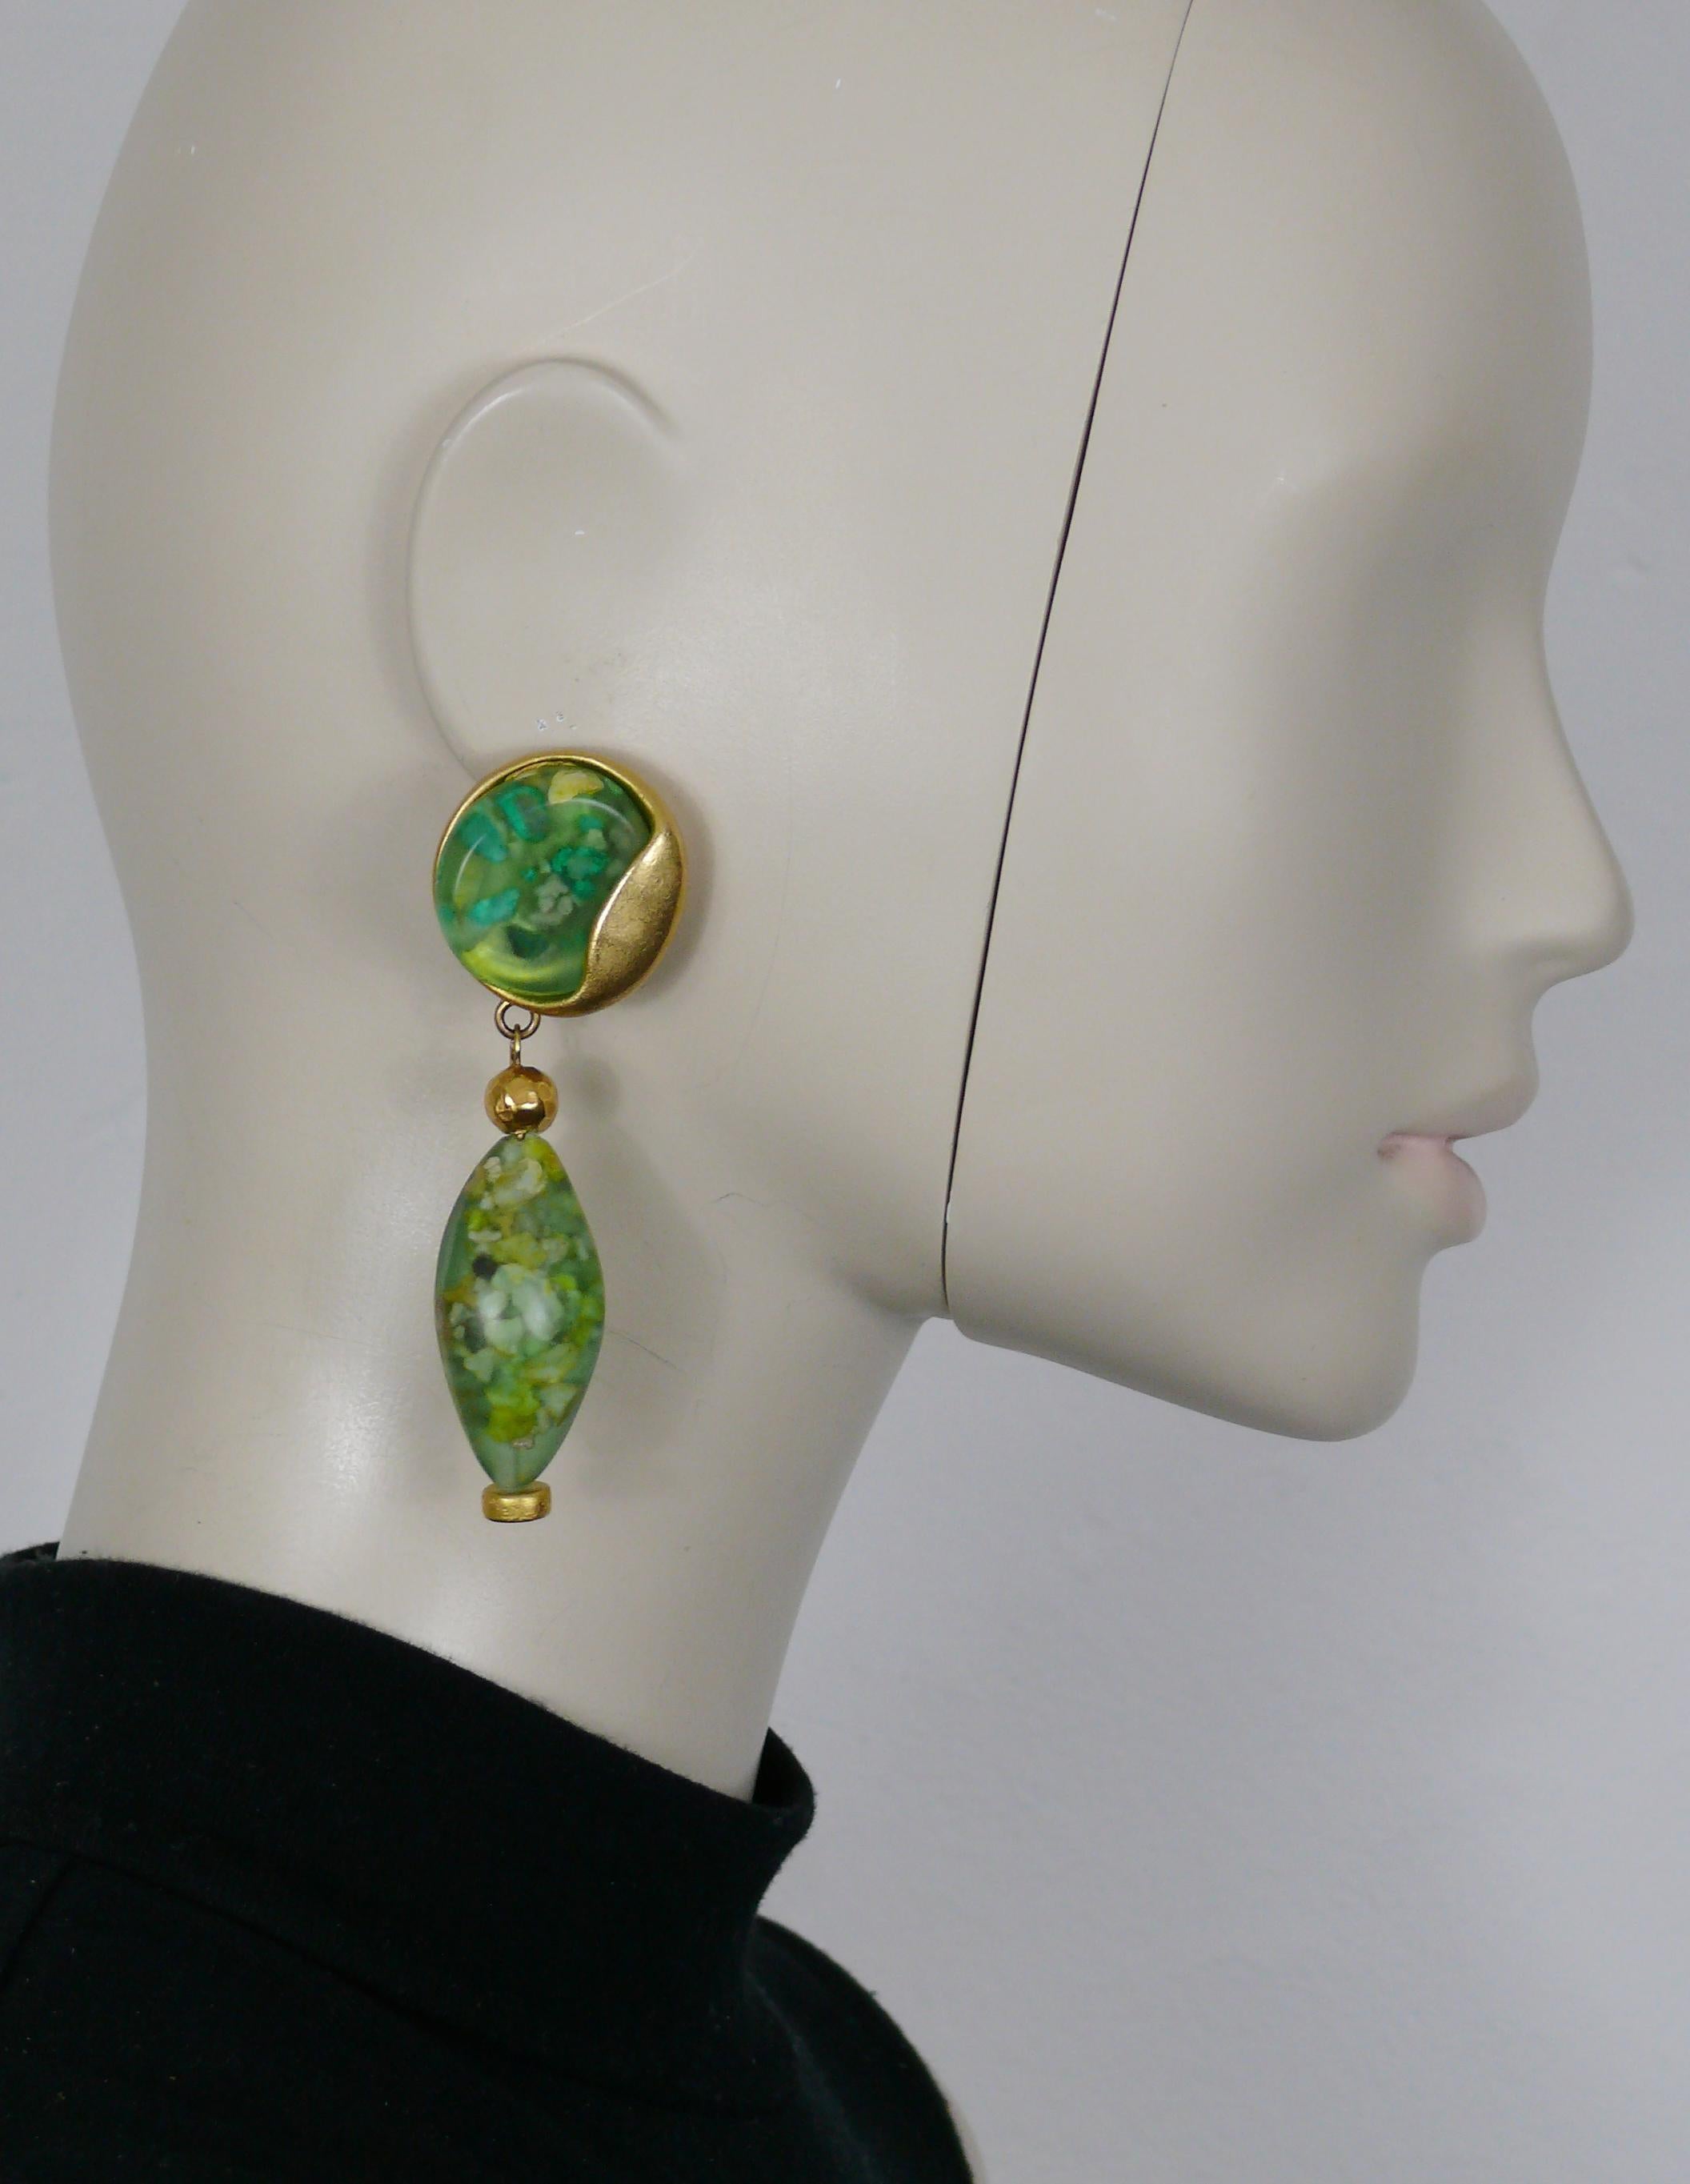 JEAN LOUIS SCHERRER vintage gold tone dangling earrings (clip-on) featuring green resin elements with stones inlaids.

Marked SCHERRER Paris.

Indicative measurements : height approx. 8.2 cm (3.23 inches) / max. width approx. 2.6 cm (1.02